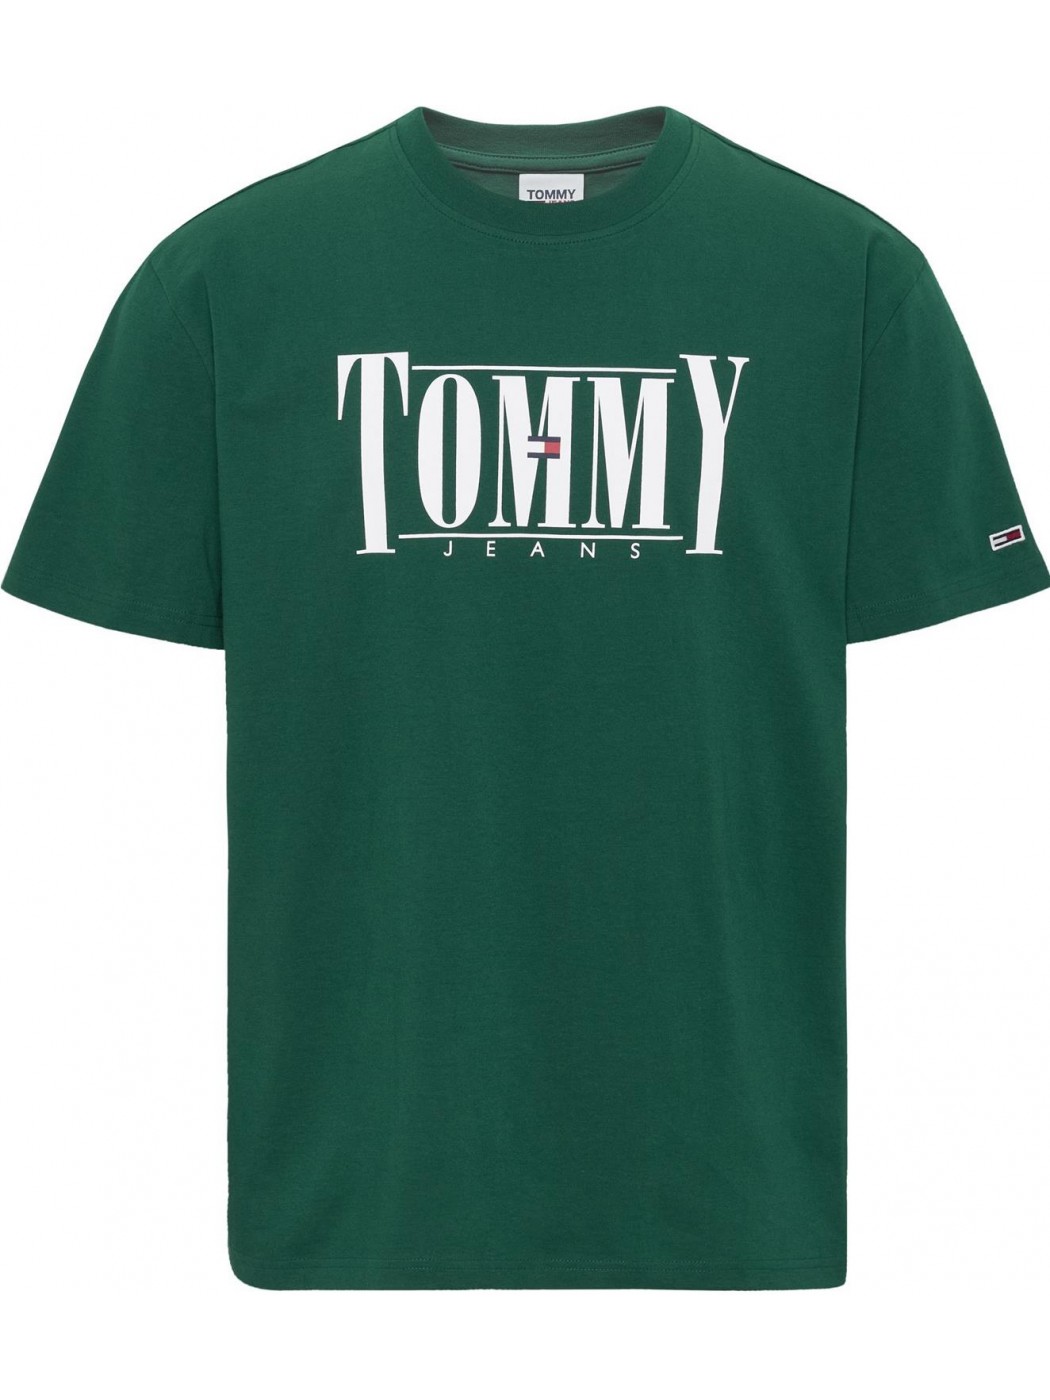 CAMIESTA TOMMY JEANS HOMBRE...